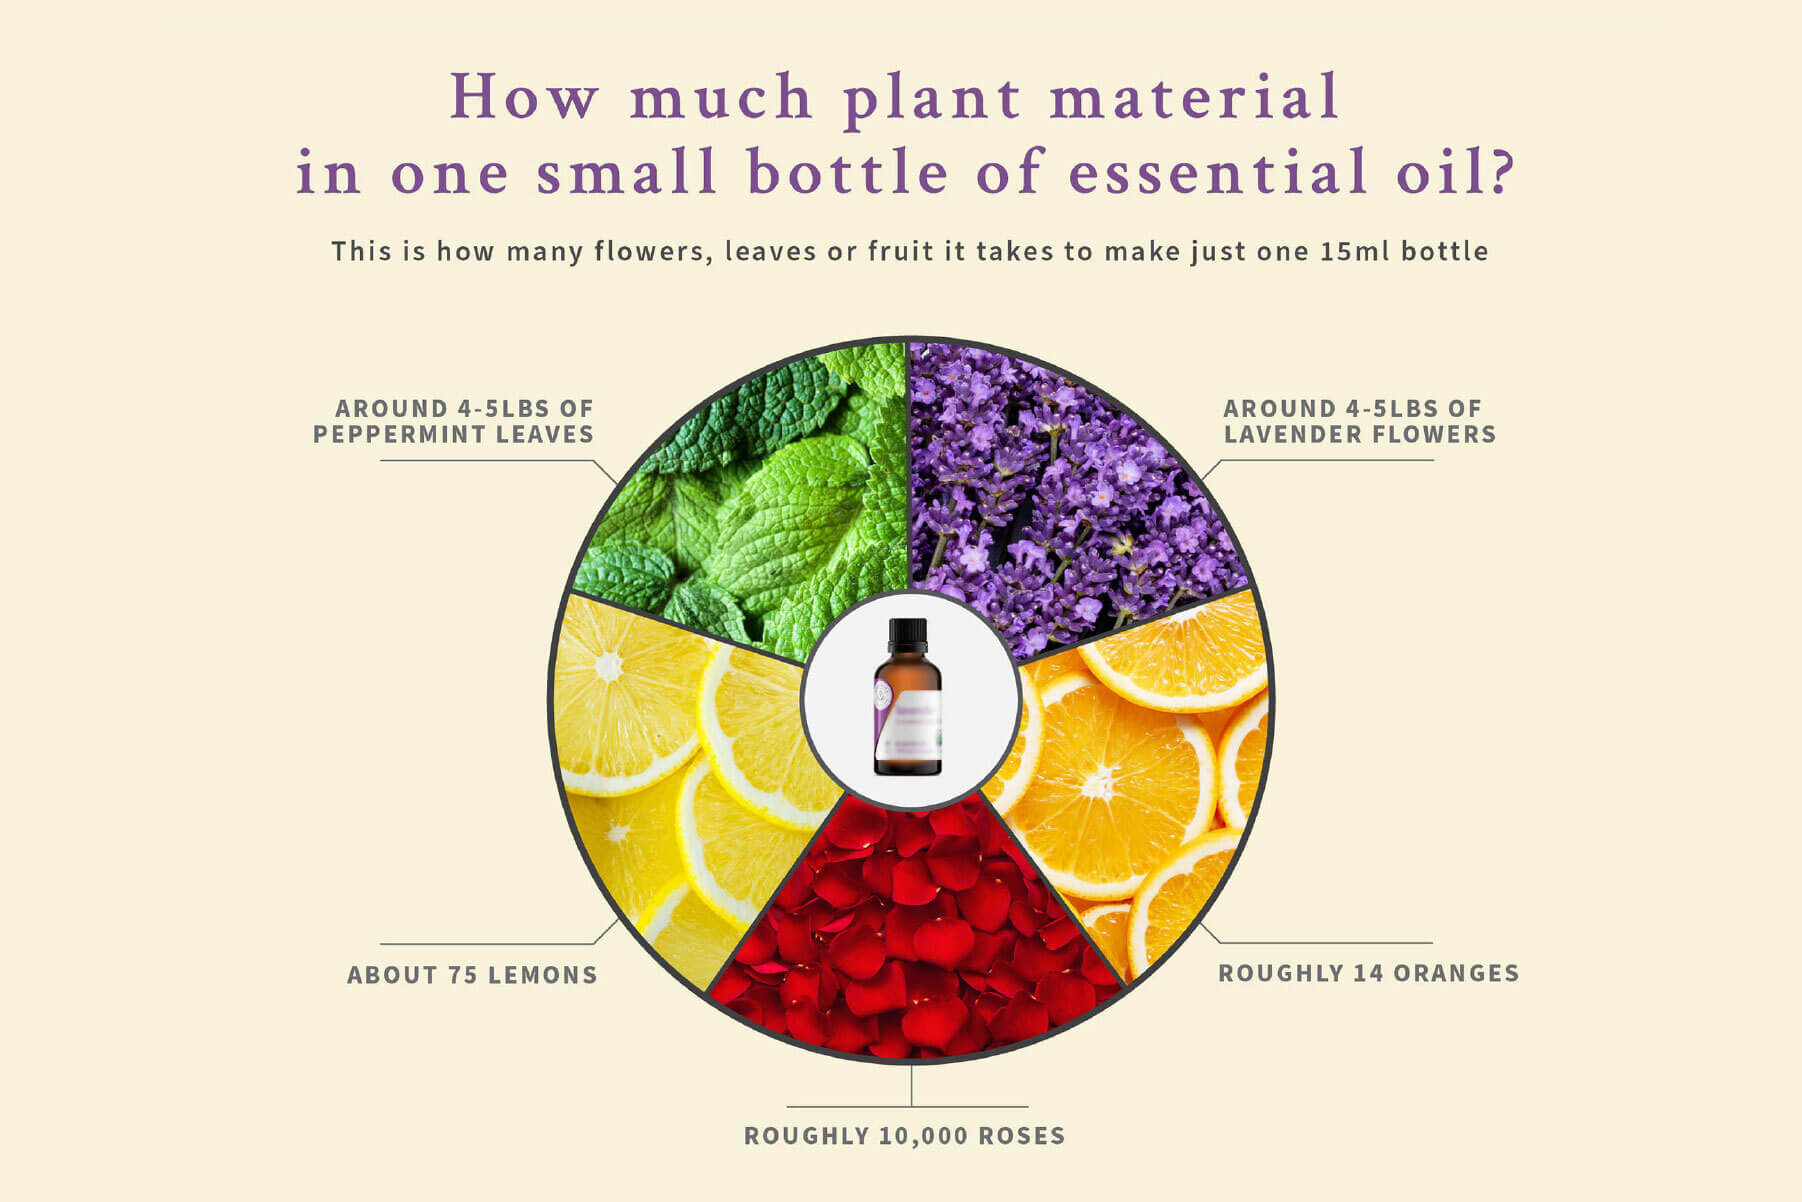 how much plant material in one small bottle of essential oil